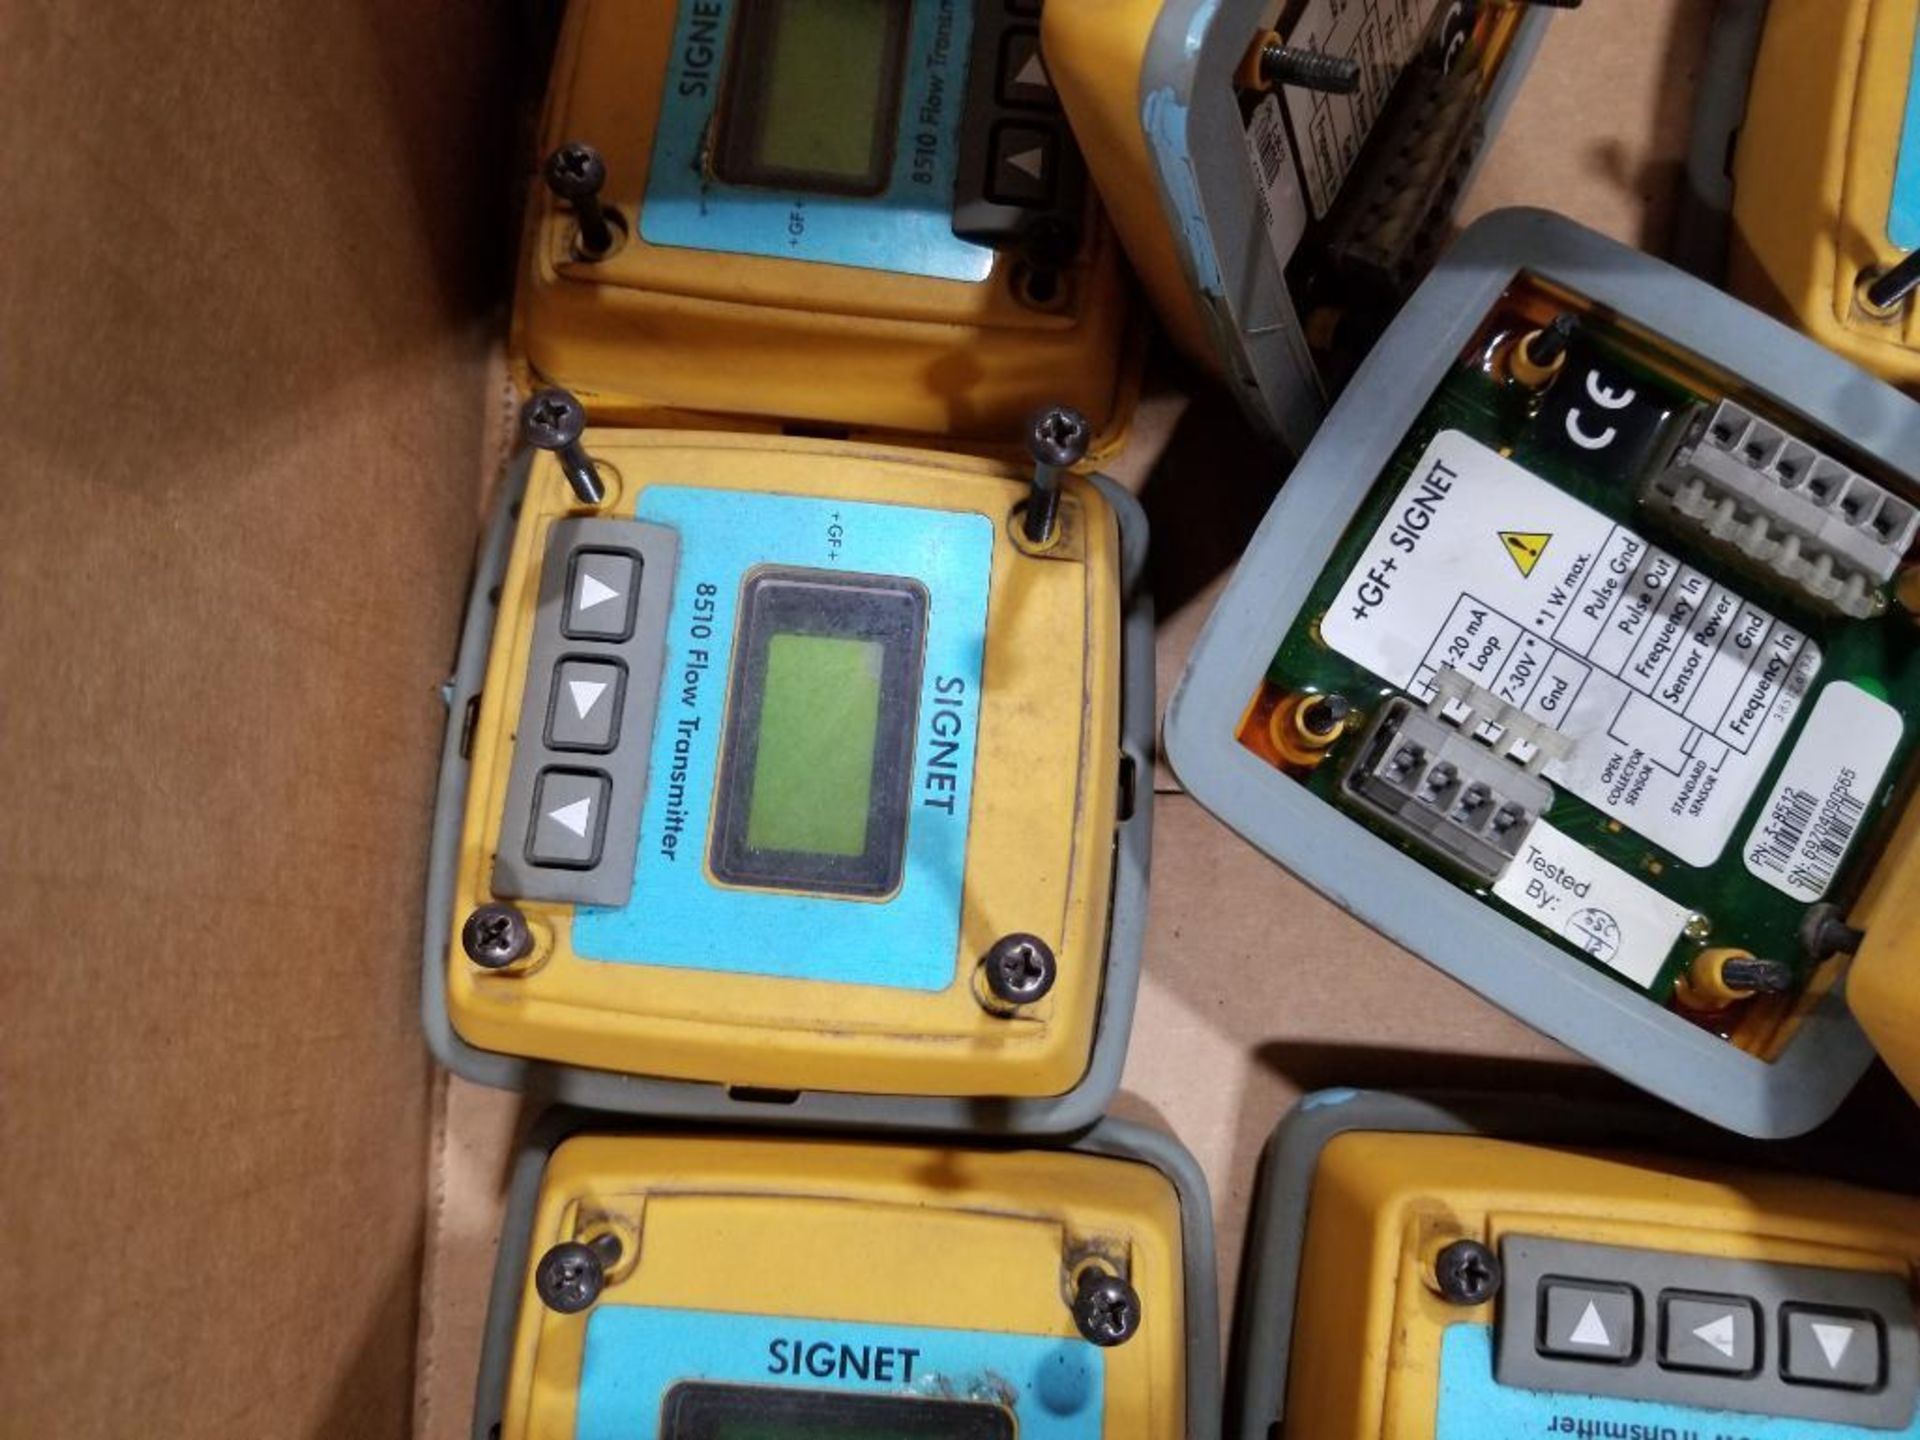 Signet 8510 Flow transmitter controllers. - Image 3 of 6